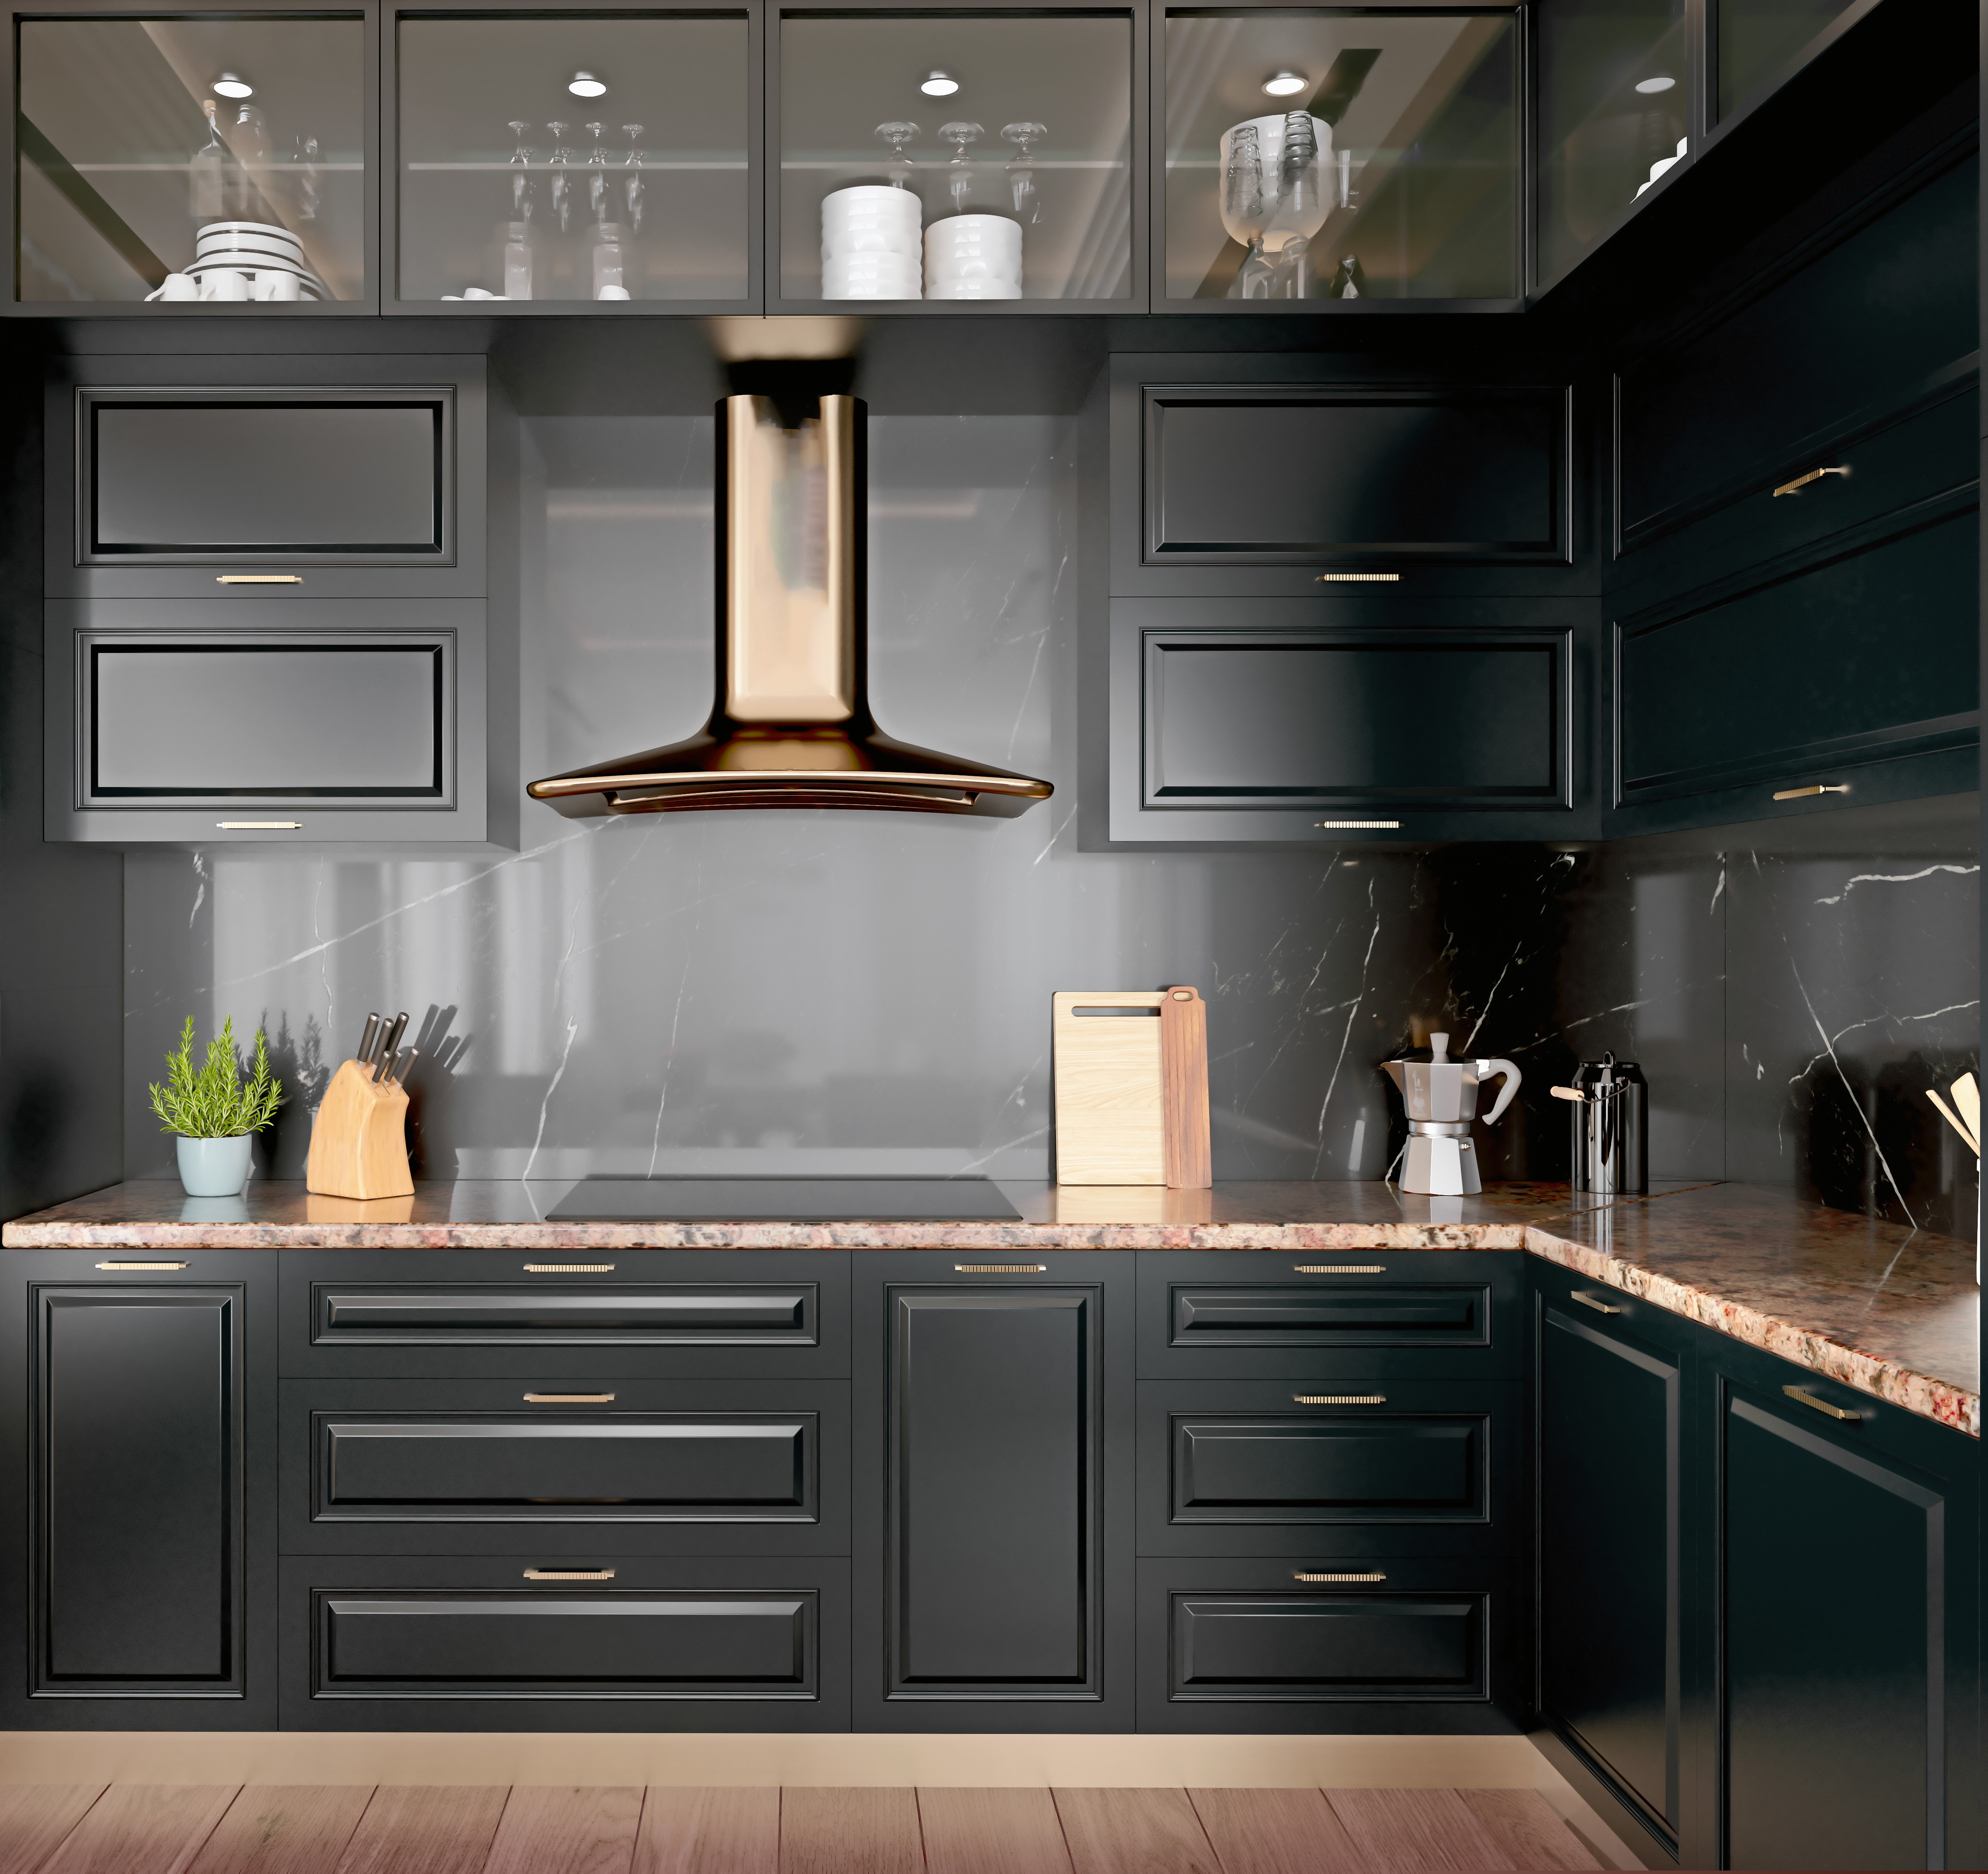 Black laminate cabinets in a kitchen.